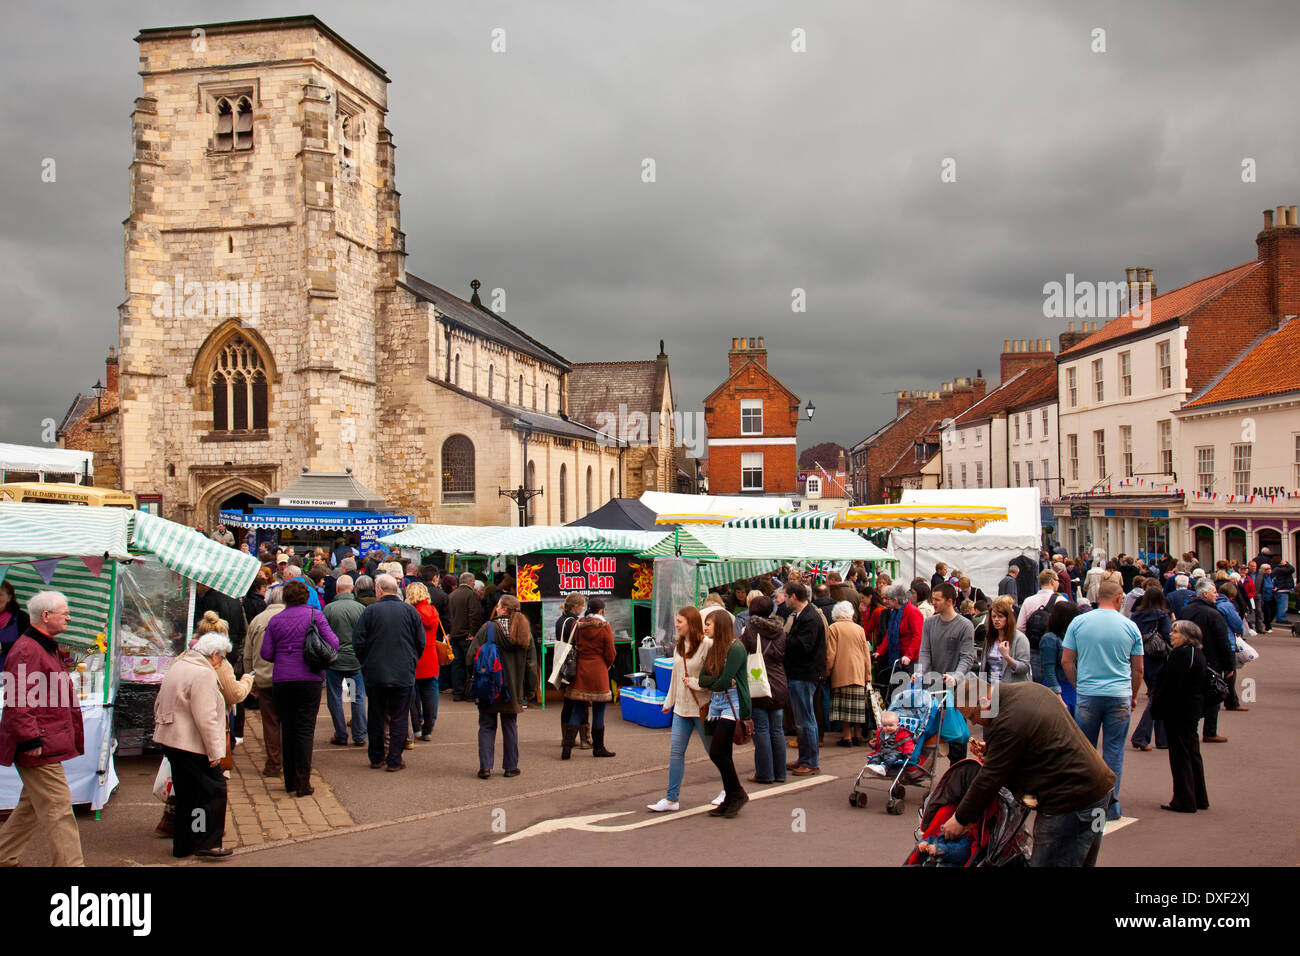 Market day in the Yorkshire market town of Malton in the United Kingdom. Stock Photo